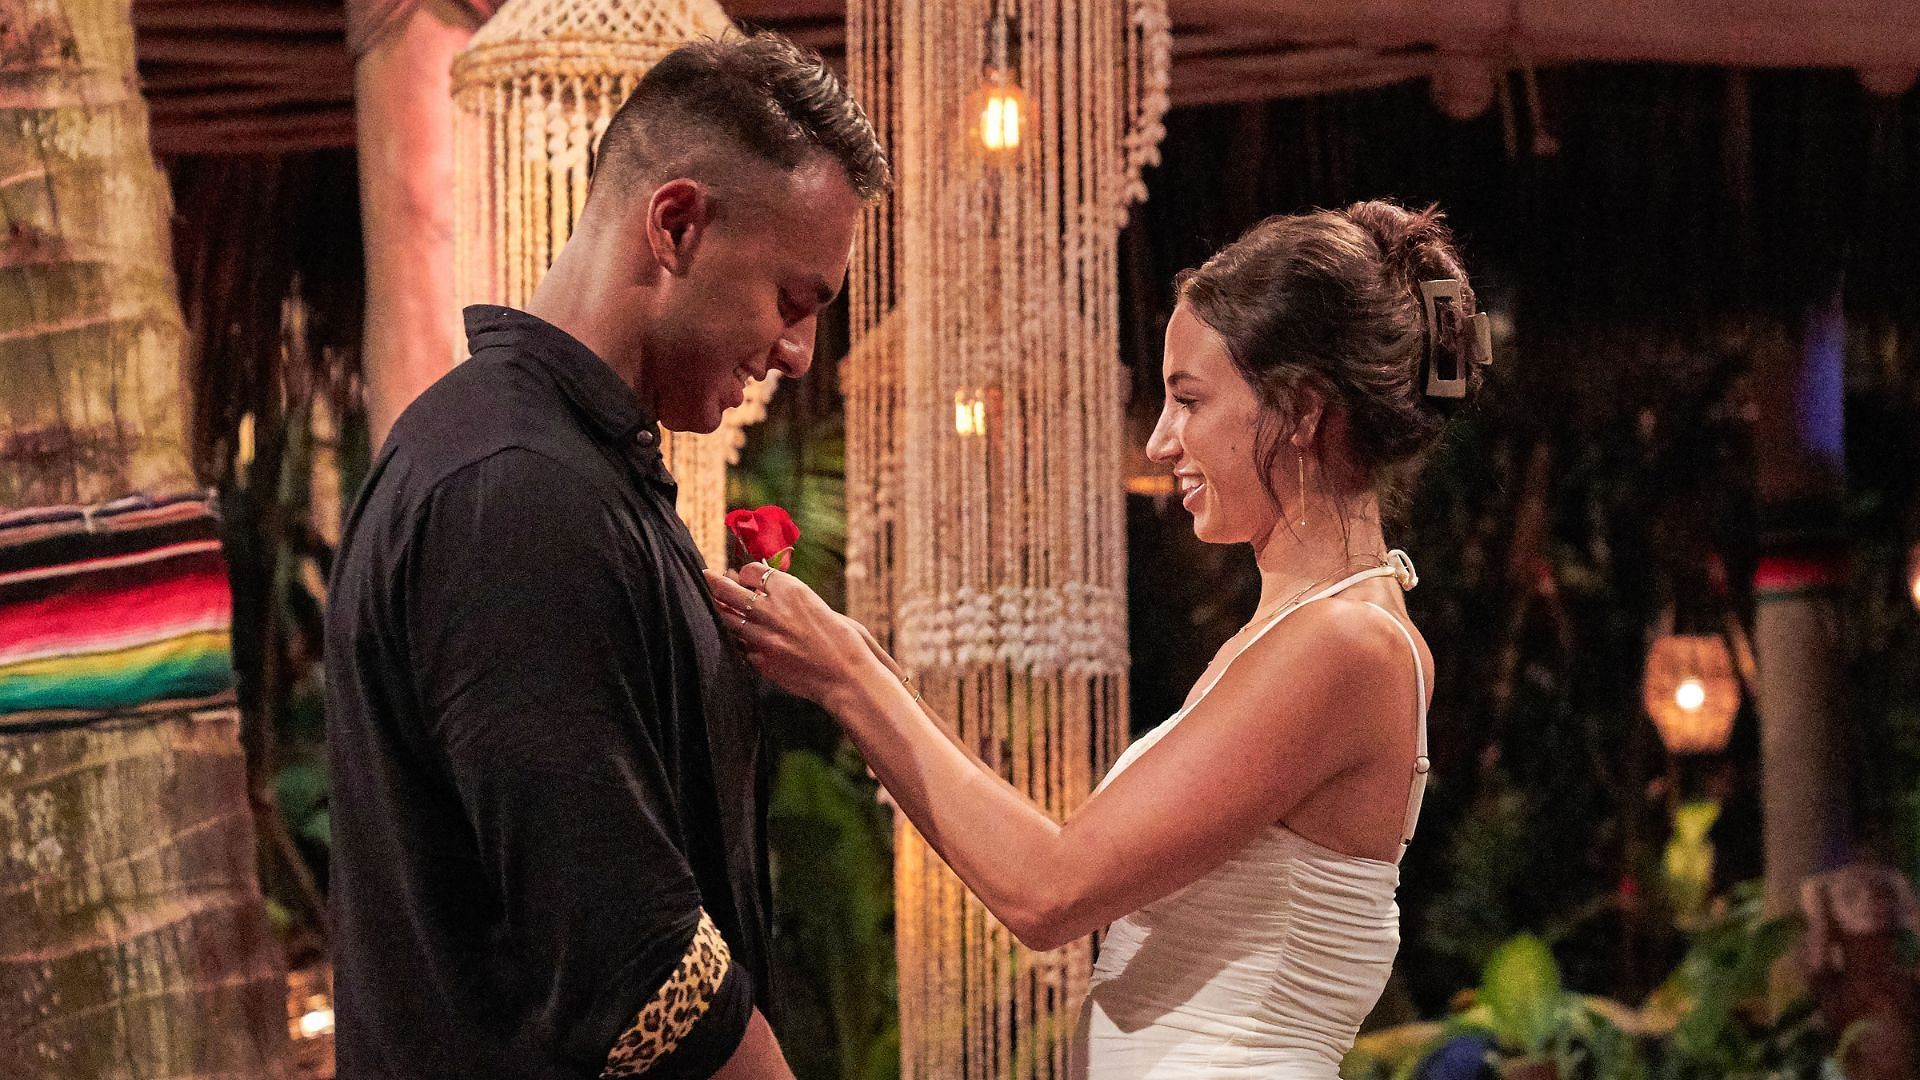 Aaron and Genevieve break up on Bachelor in Paradise